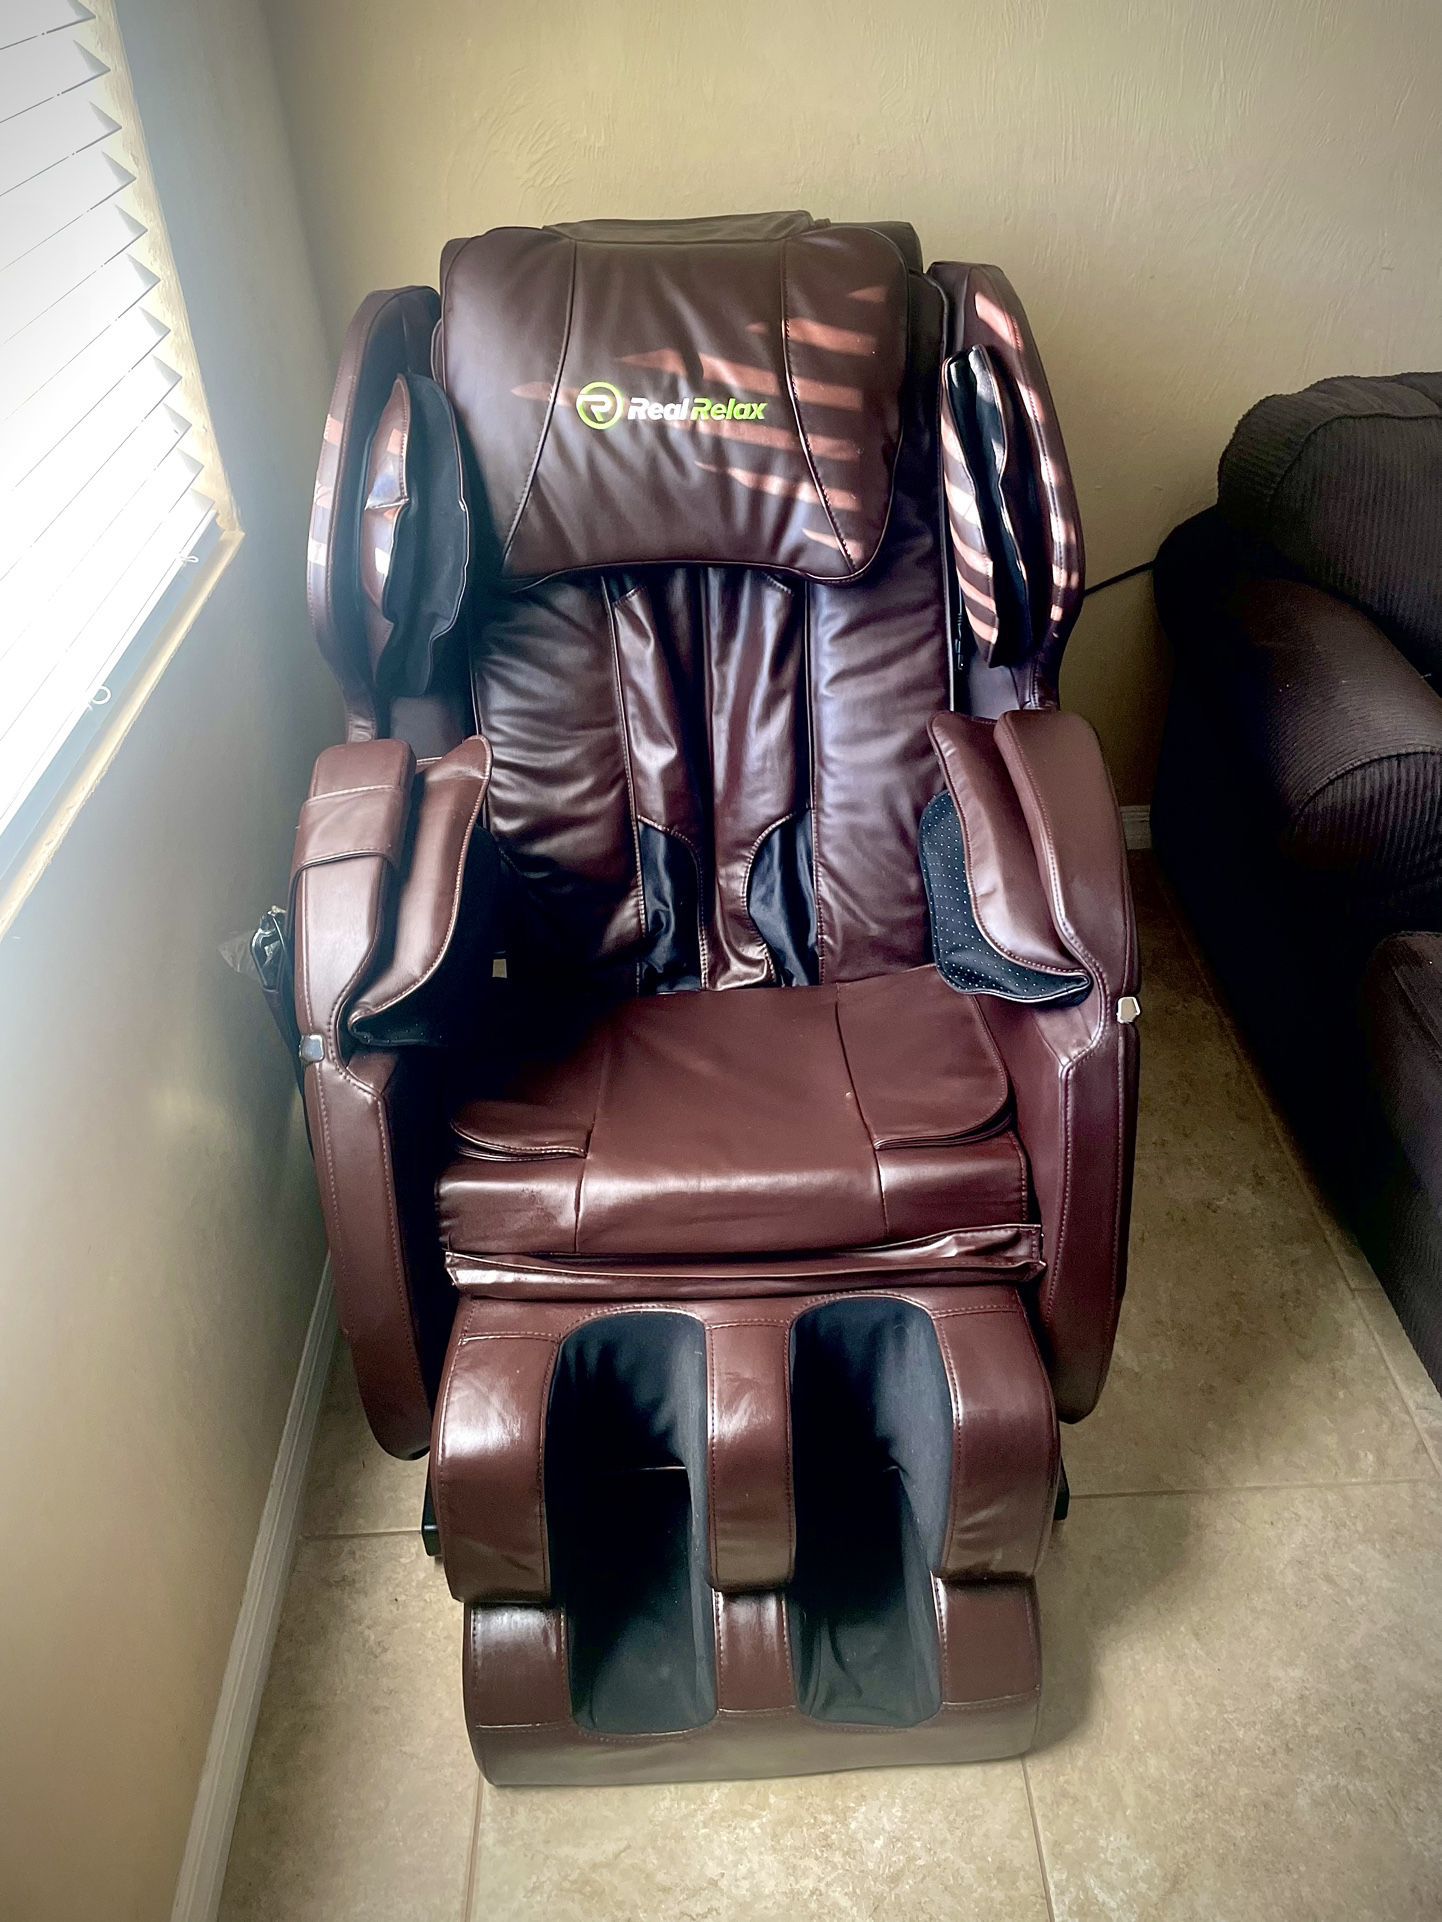 Real Relax-Deluxe Massage Chair